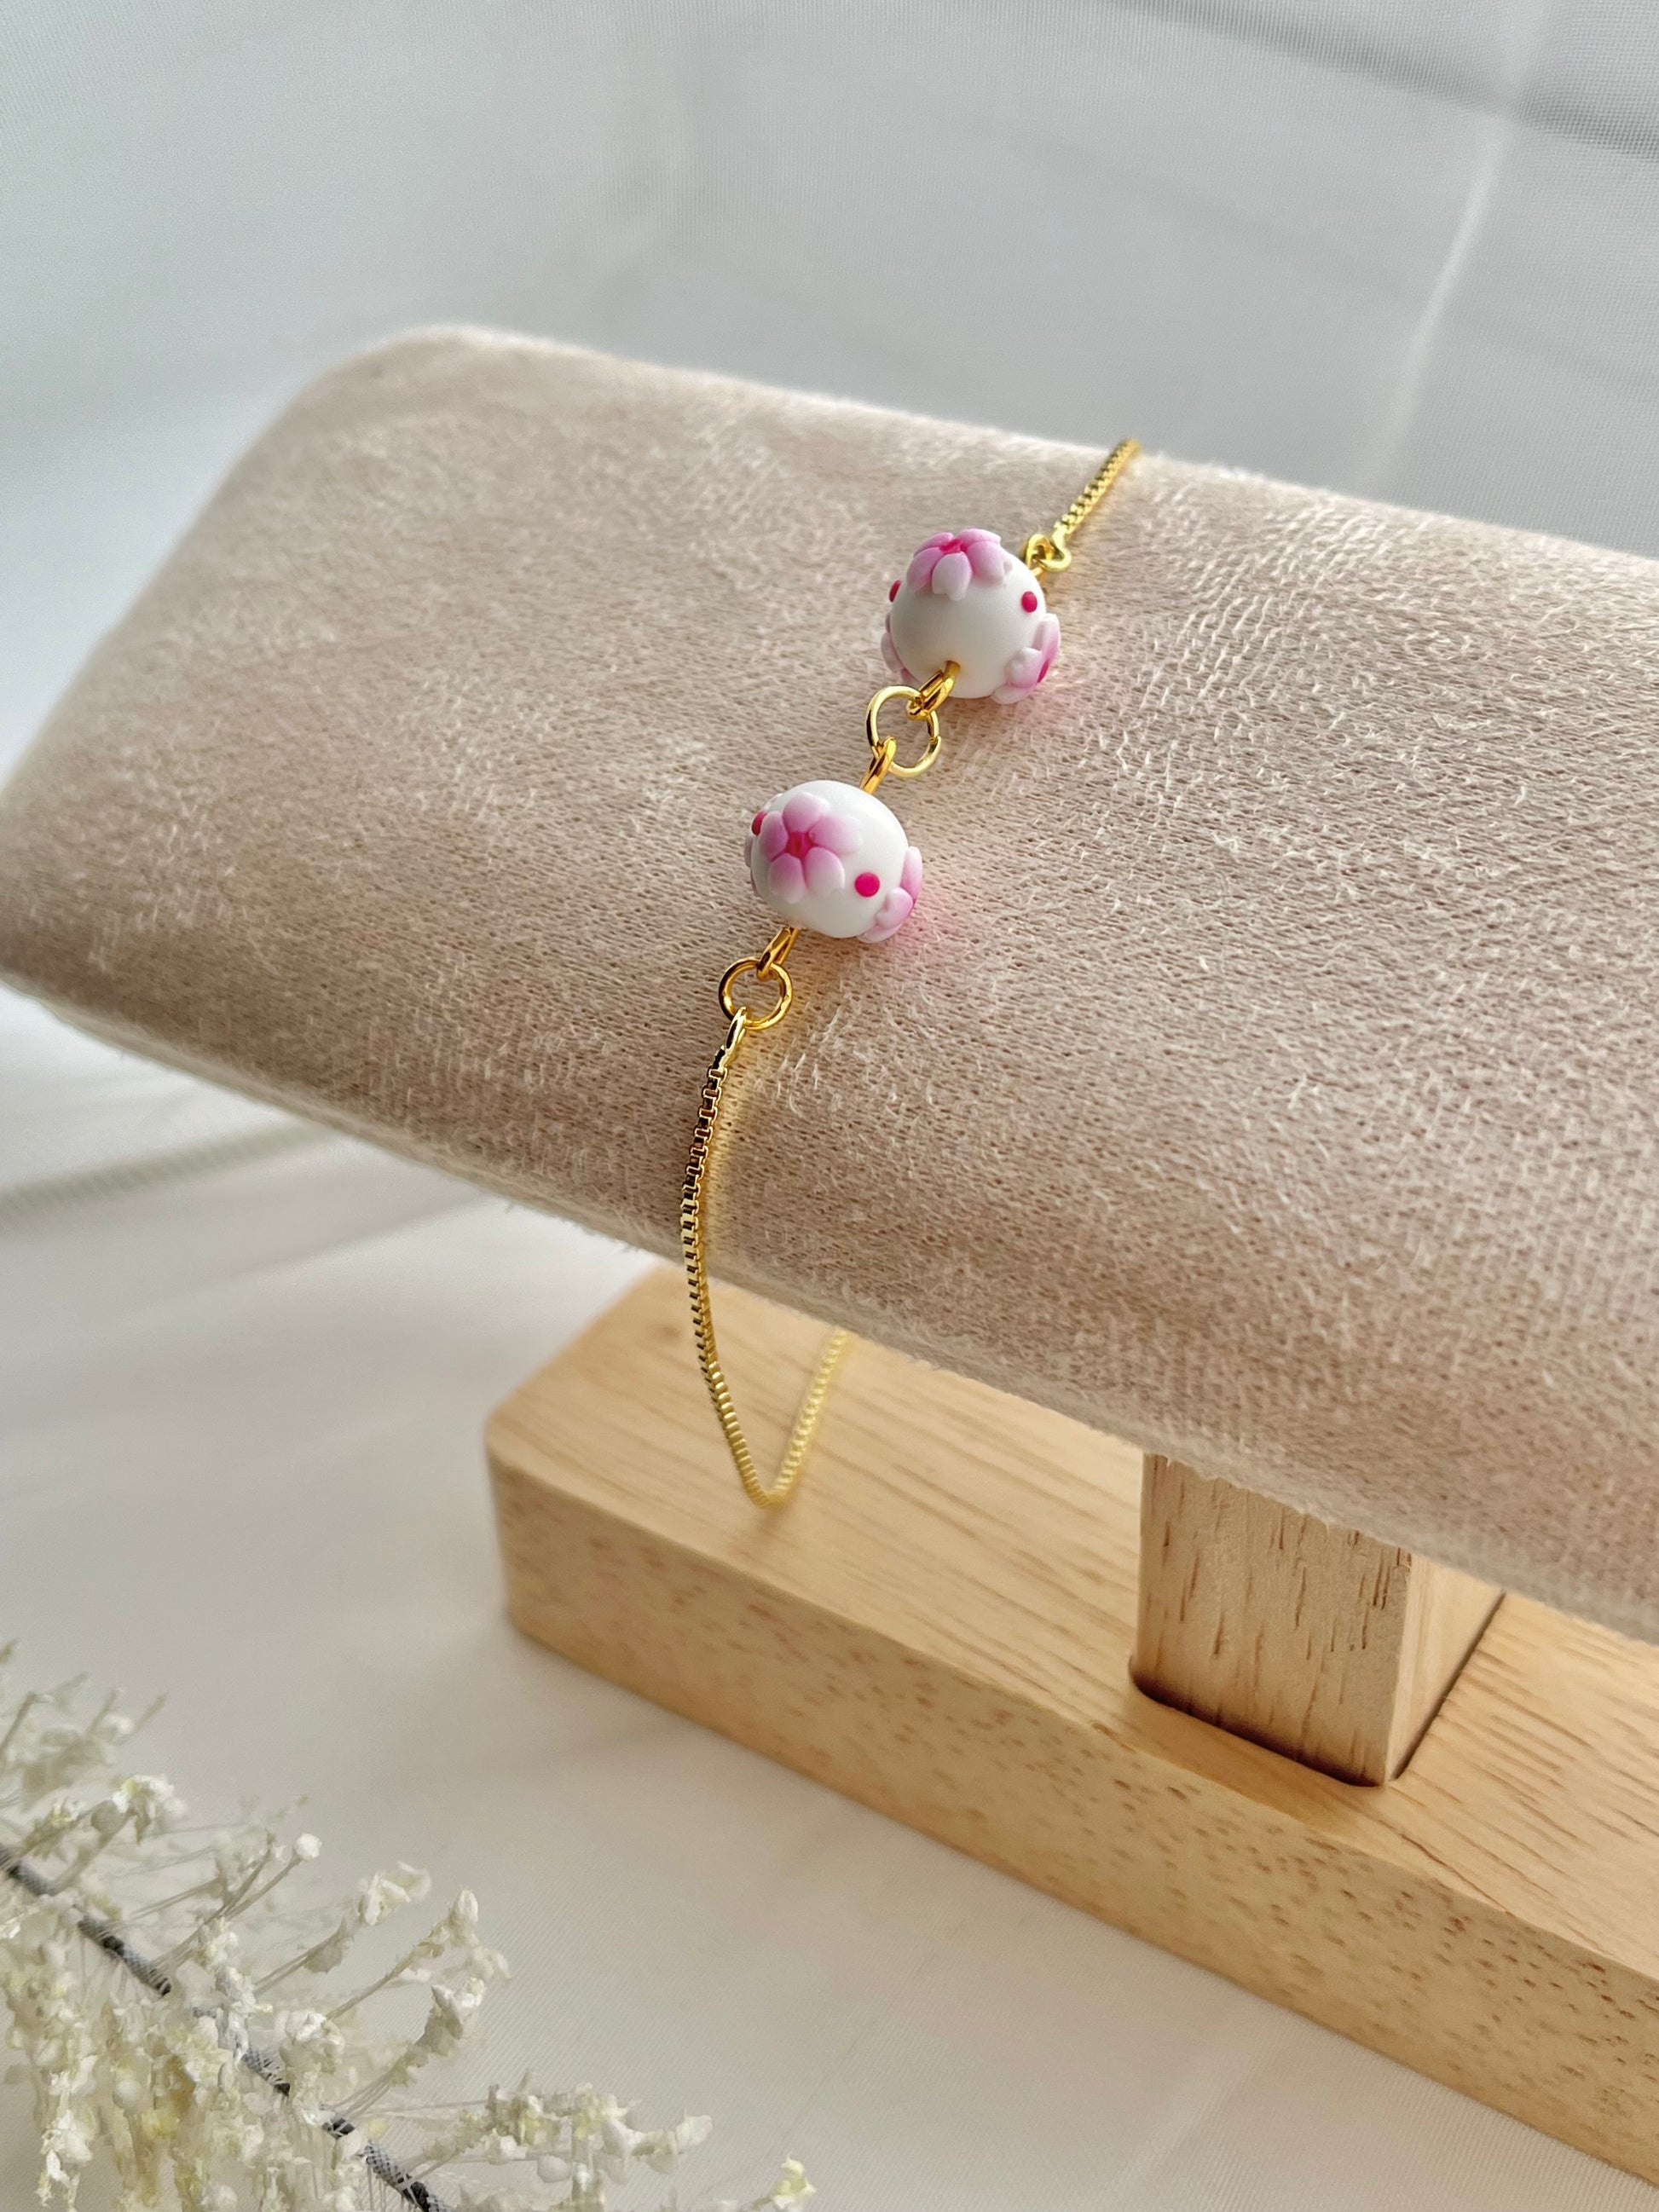 One floral bracelet in cherry blossom style with 2 beads on a bracelet stand